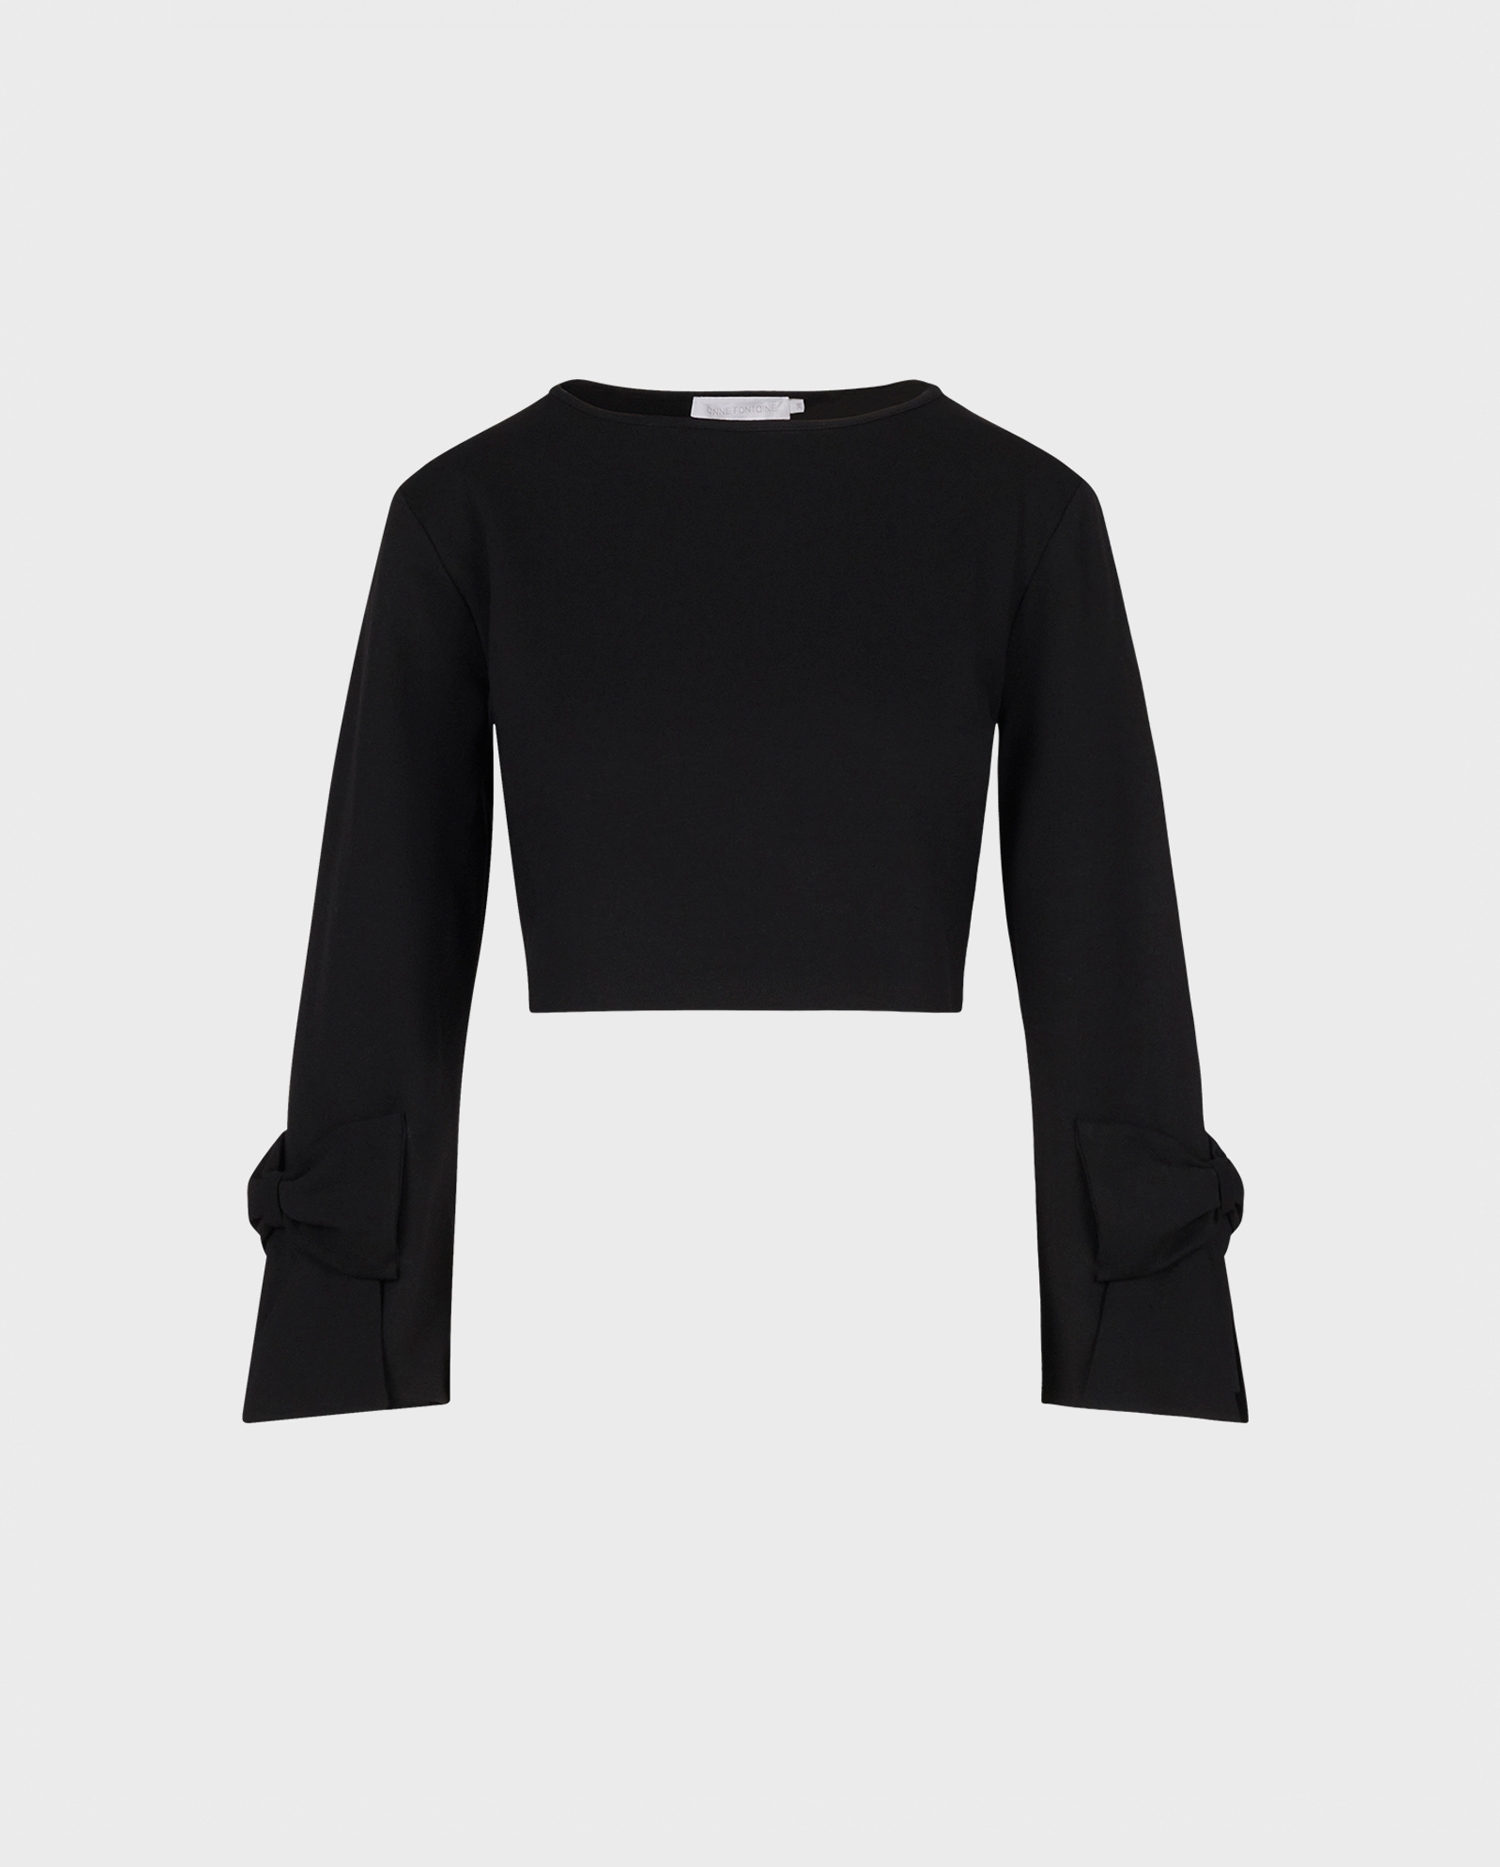 Discover The TWIST Cropped sweater in black featuring oversized statement bows from ANNE FONTAINE